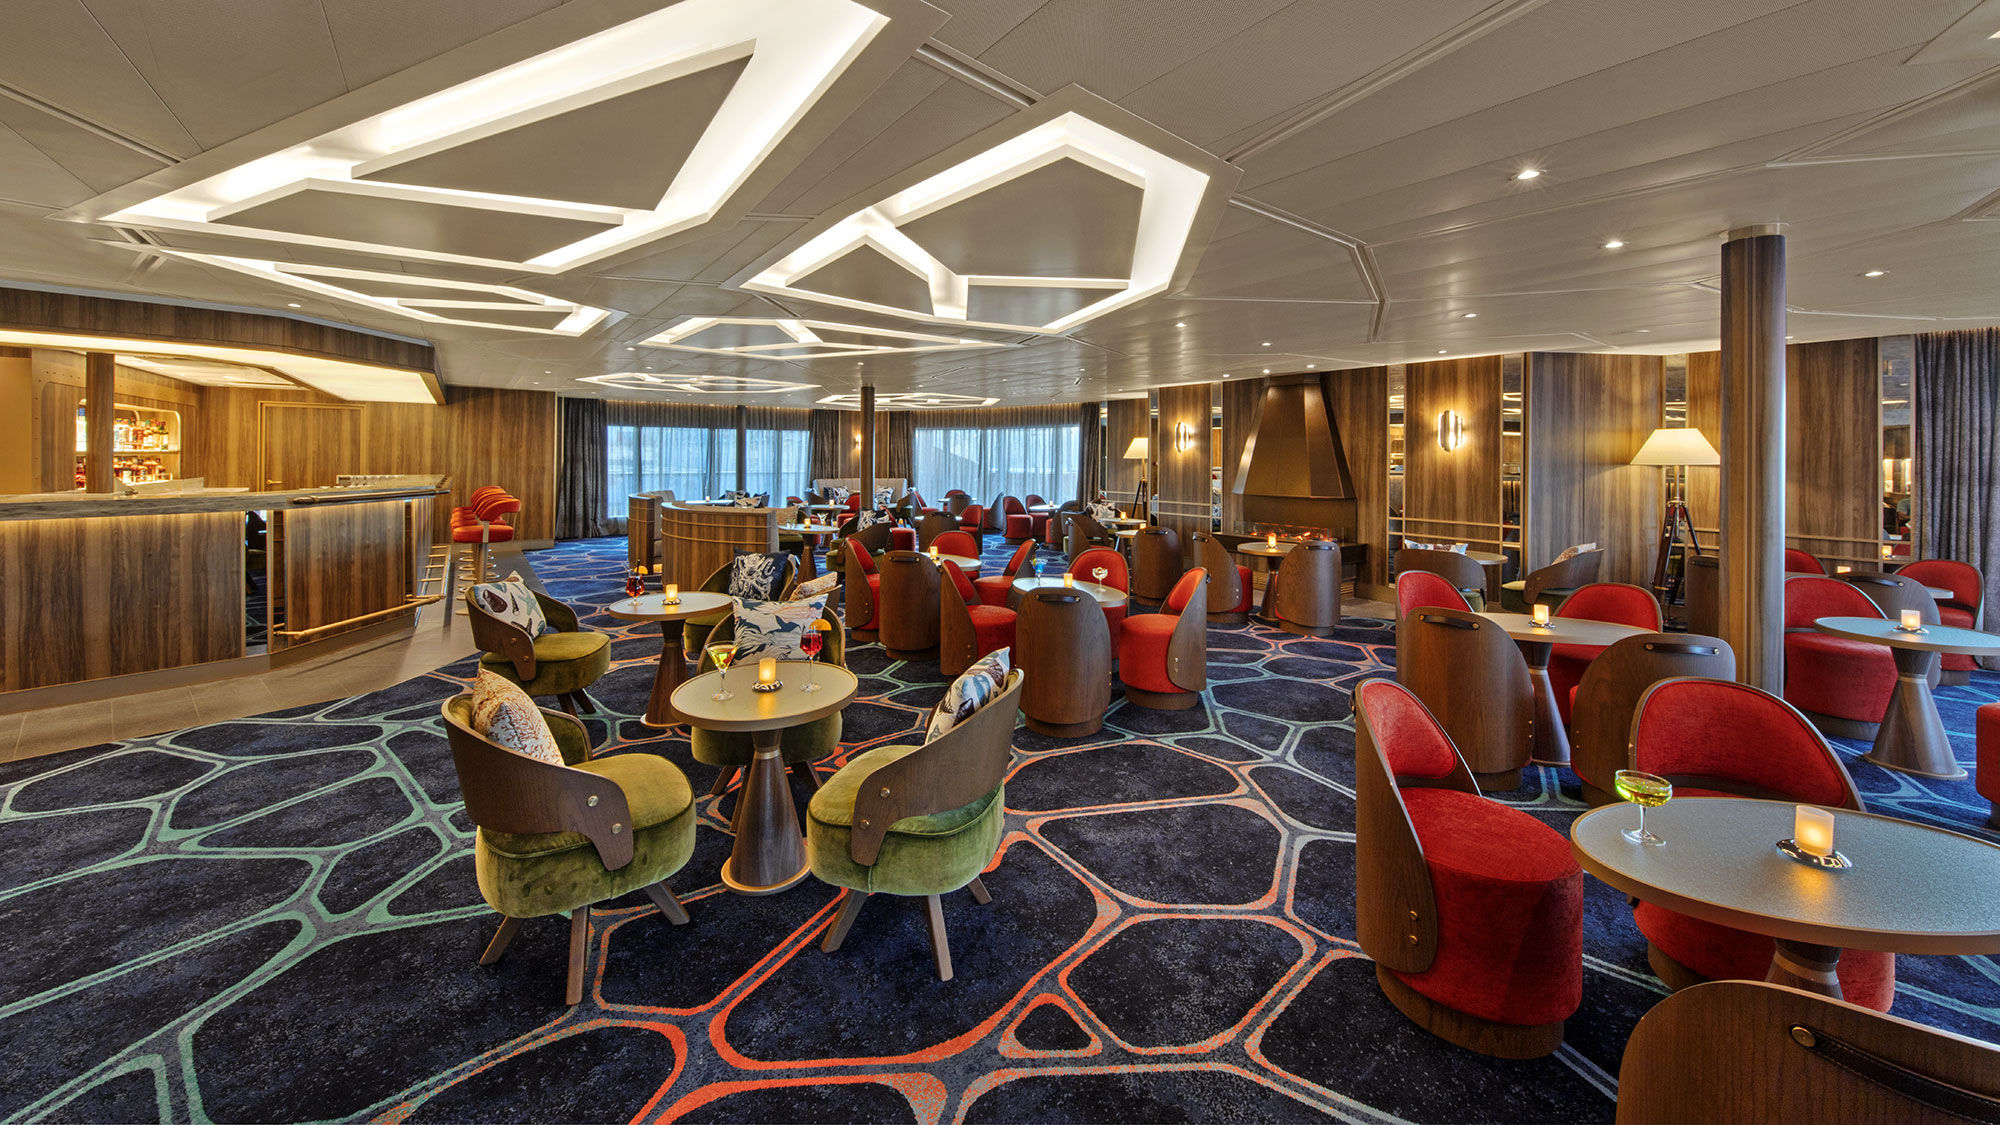 The Club on the Seabourn Venture is a space for afternoon tea, pre-dinner drinks and music.